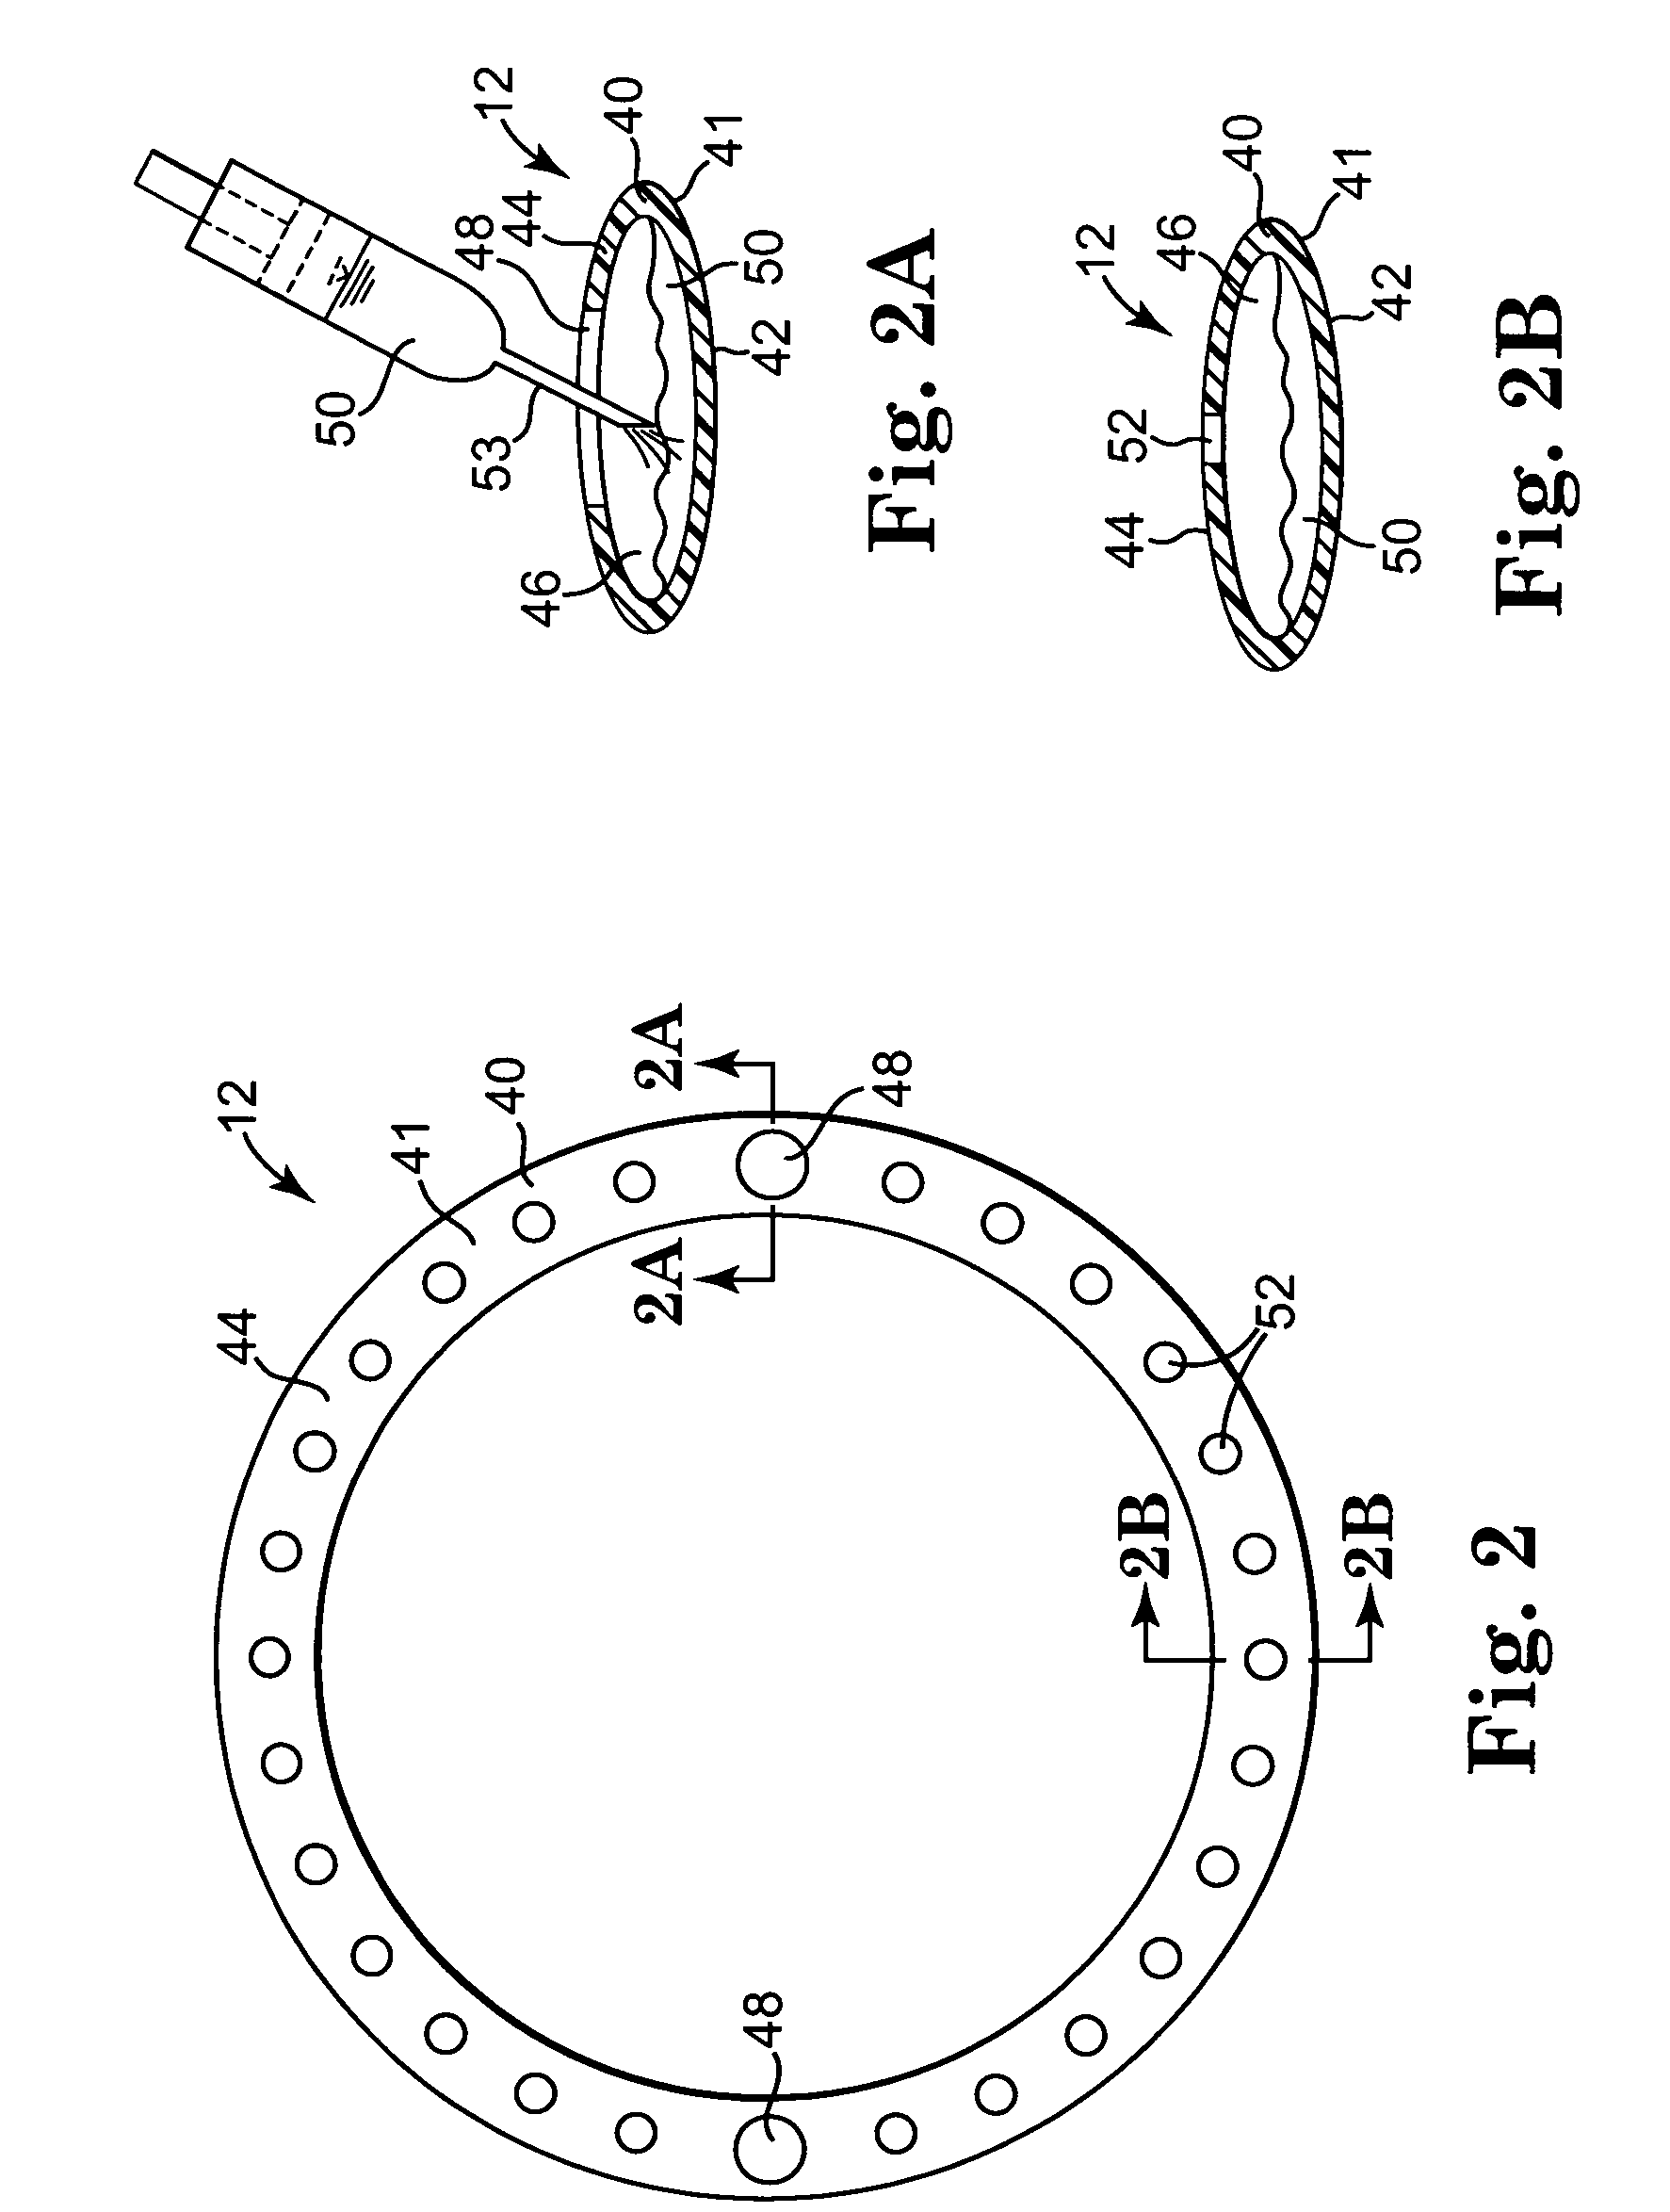 Pharmacological delivery implement for use with cardiac repair devices